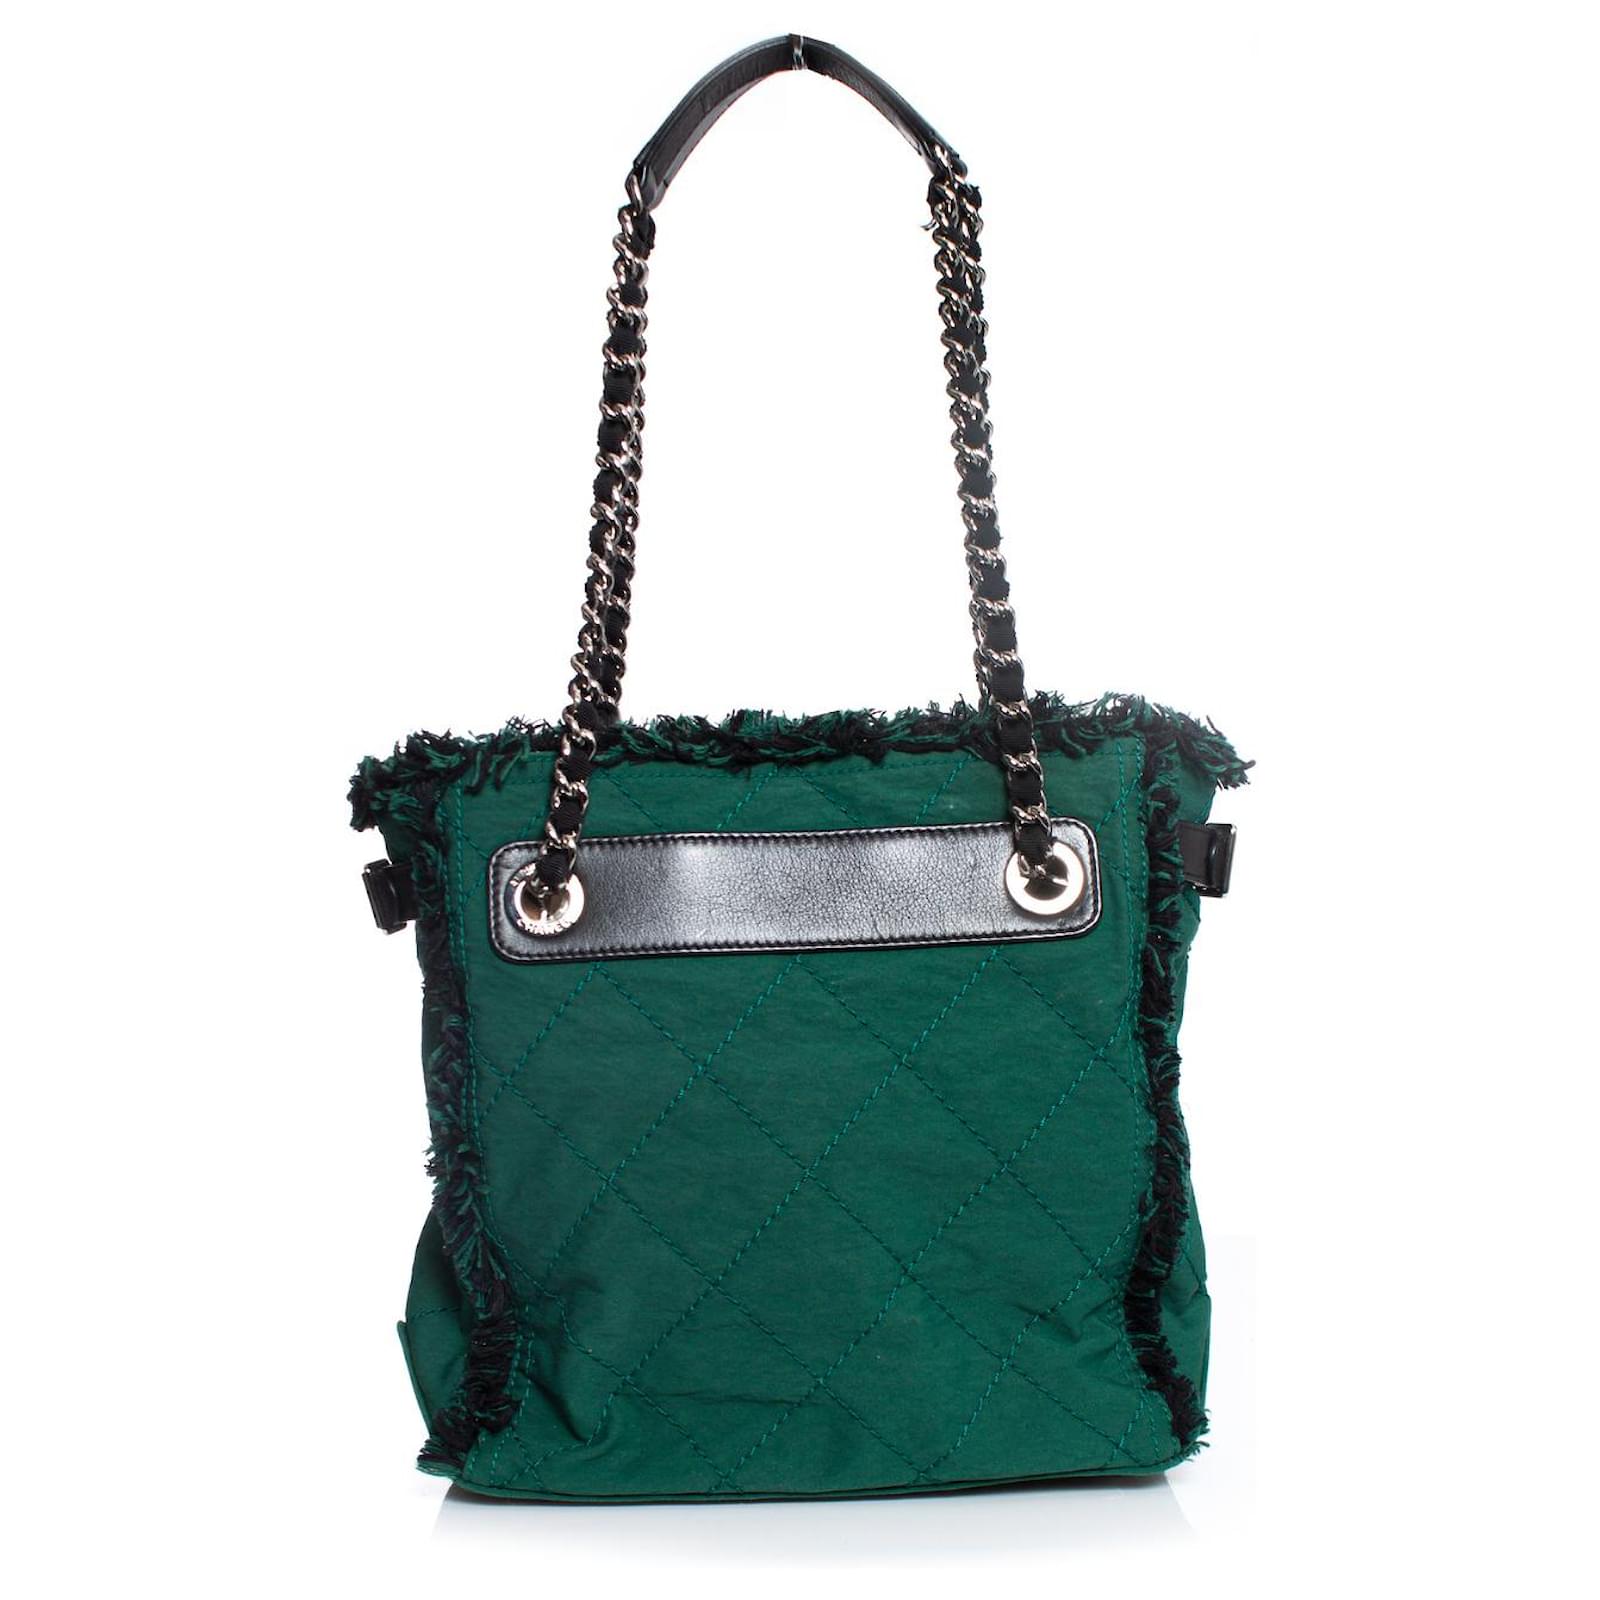 Chanel Quilted Tote Bag Green